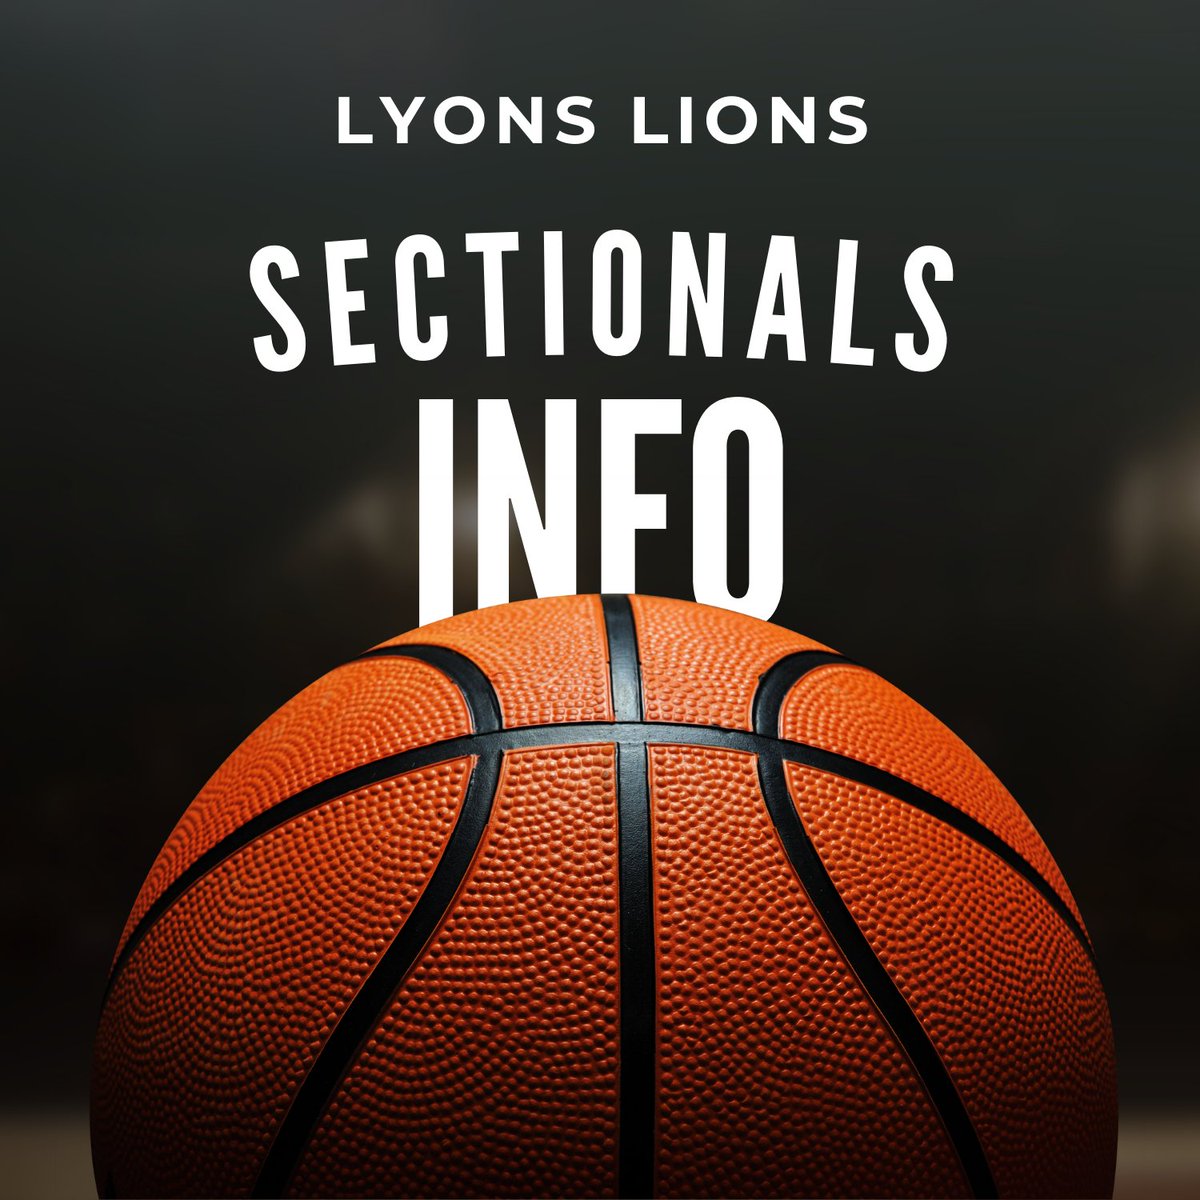 Congrats @goLYLIONS Girls Basketball for their 84-26 win over EMDCS 🏀 They advance & play the winner of Cuba Rushford/Perry on Sat., 2/25 at 2pm.

Our Boys Basketball team will host Charles G. Finney on Fri., 2/24 at 7pm.

Brackets, tix info, streaming: bit.ly/LYNo1Seed